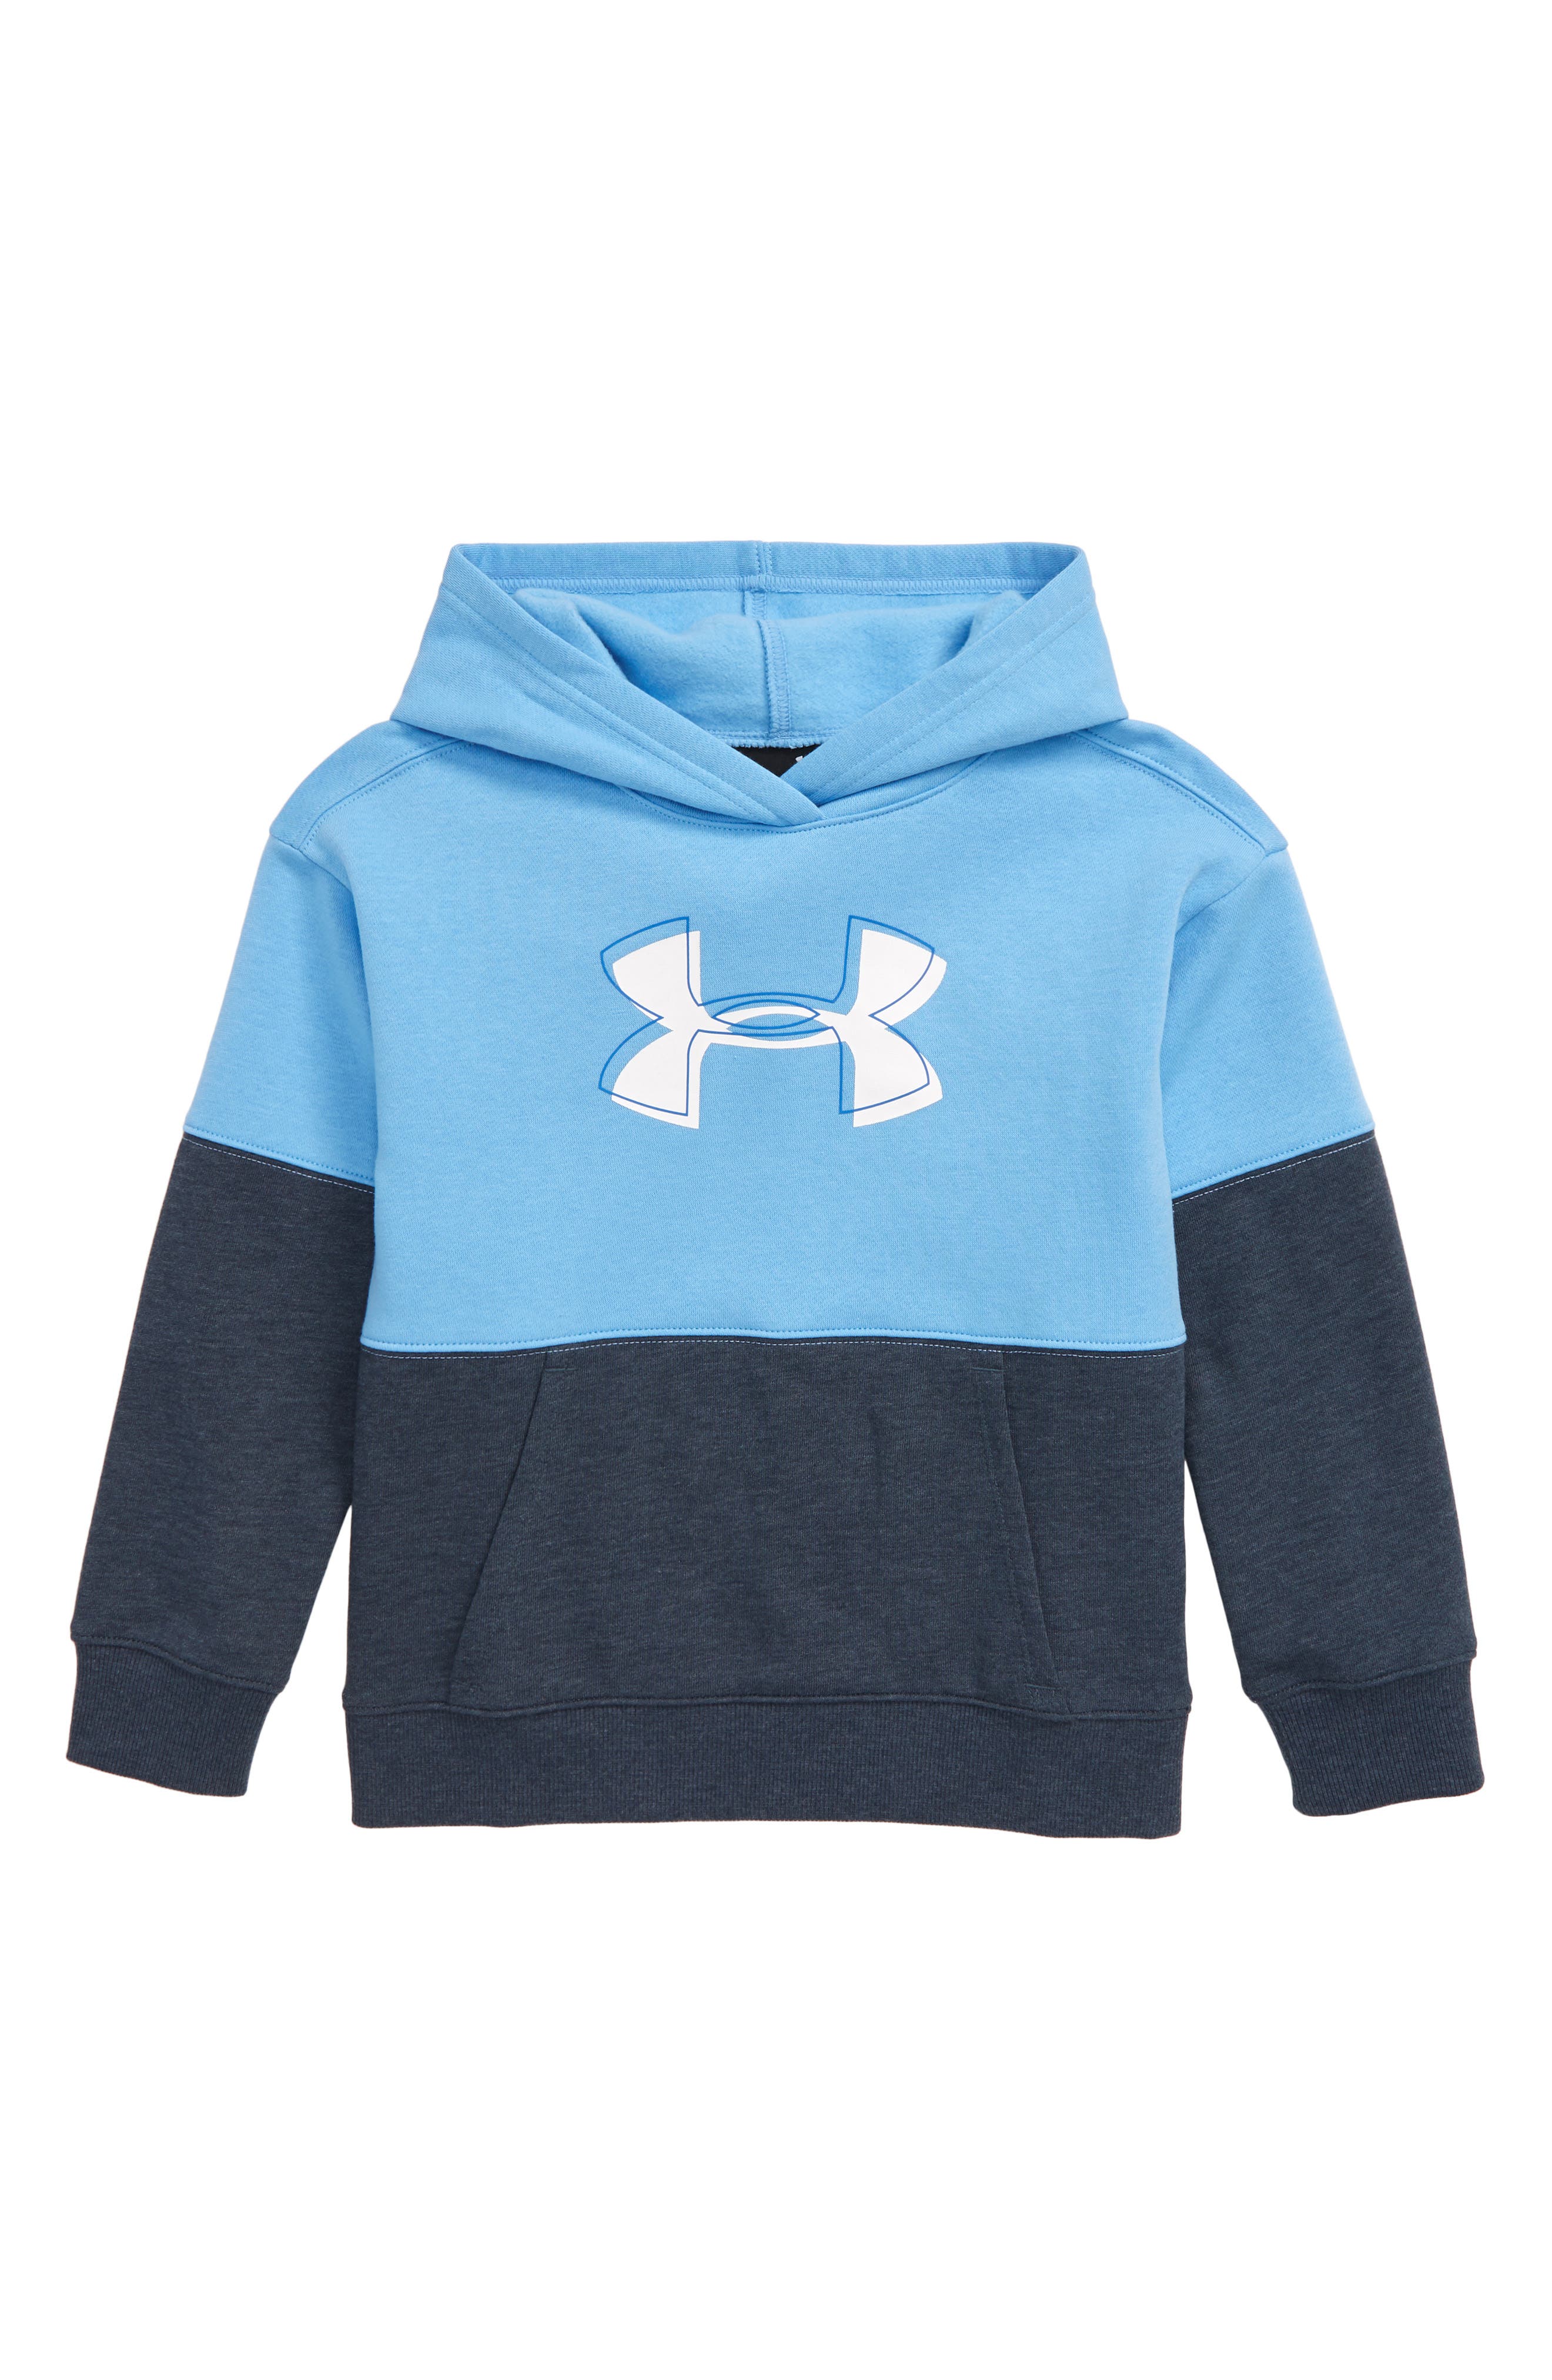 youth boys under armour hoodies